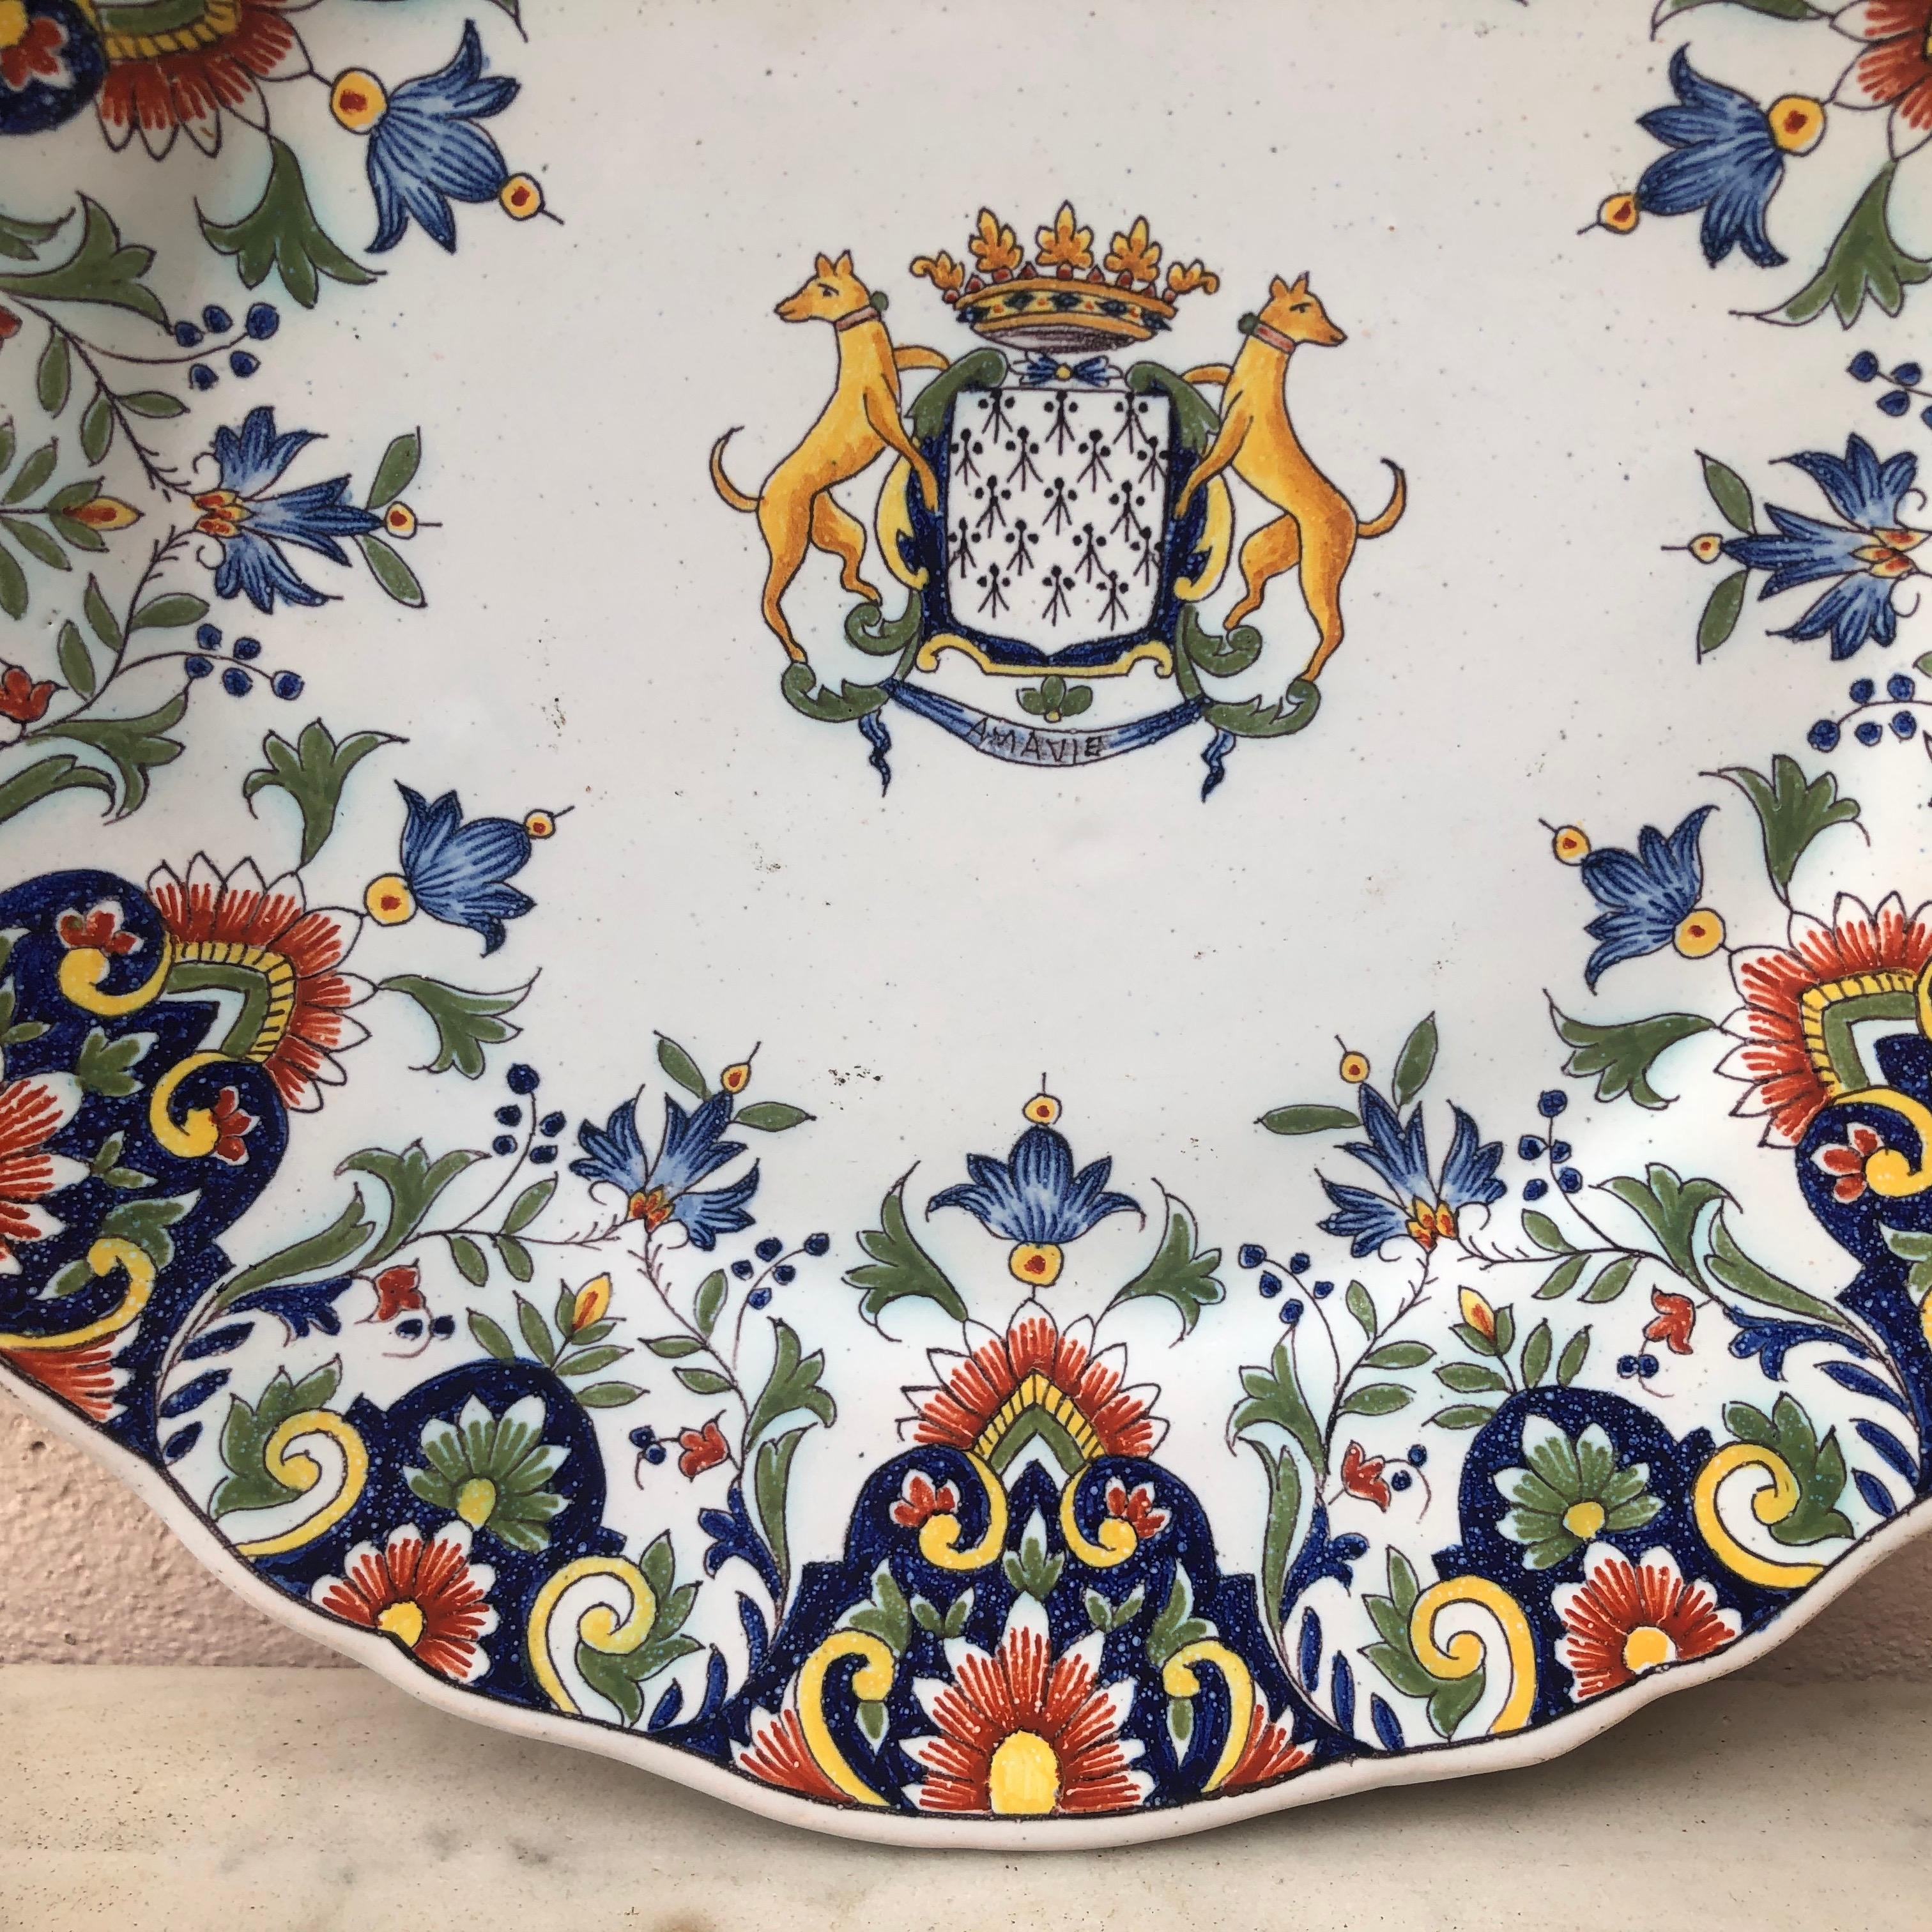 French Provincial French Faience Plate Fourmaintraux Desvres, circa 1890